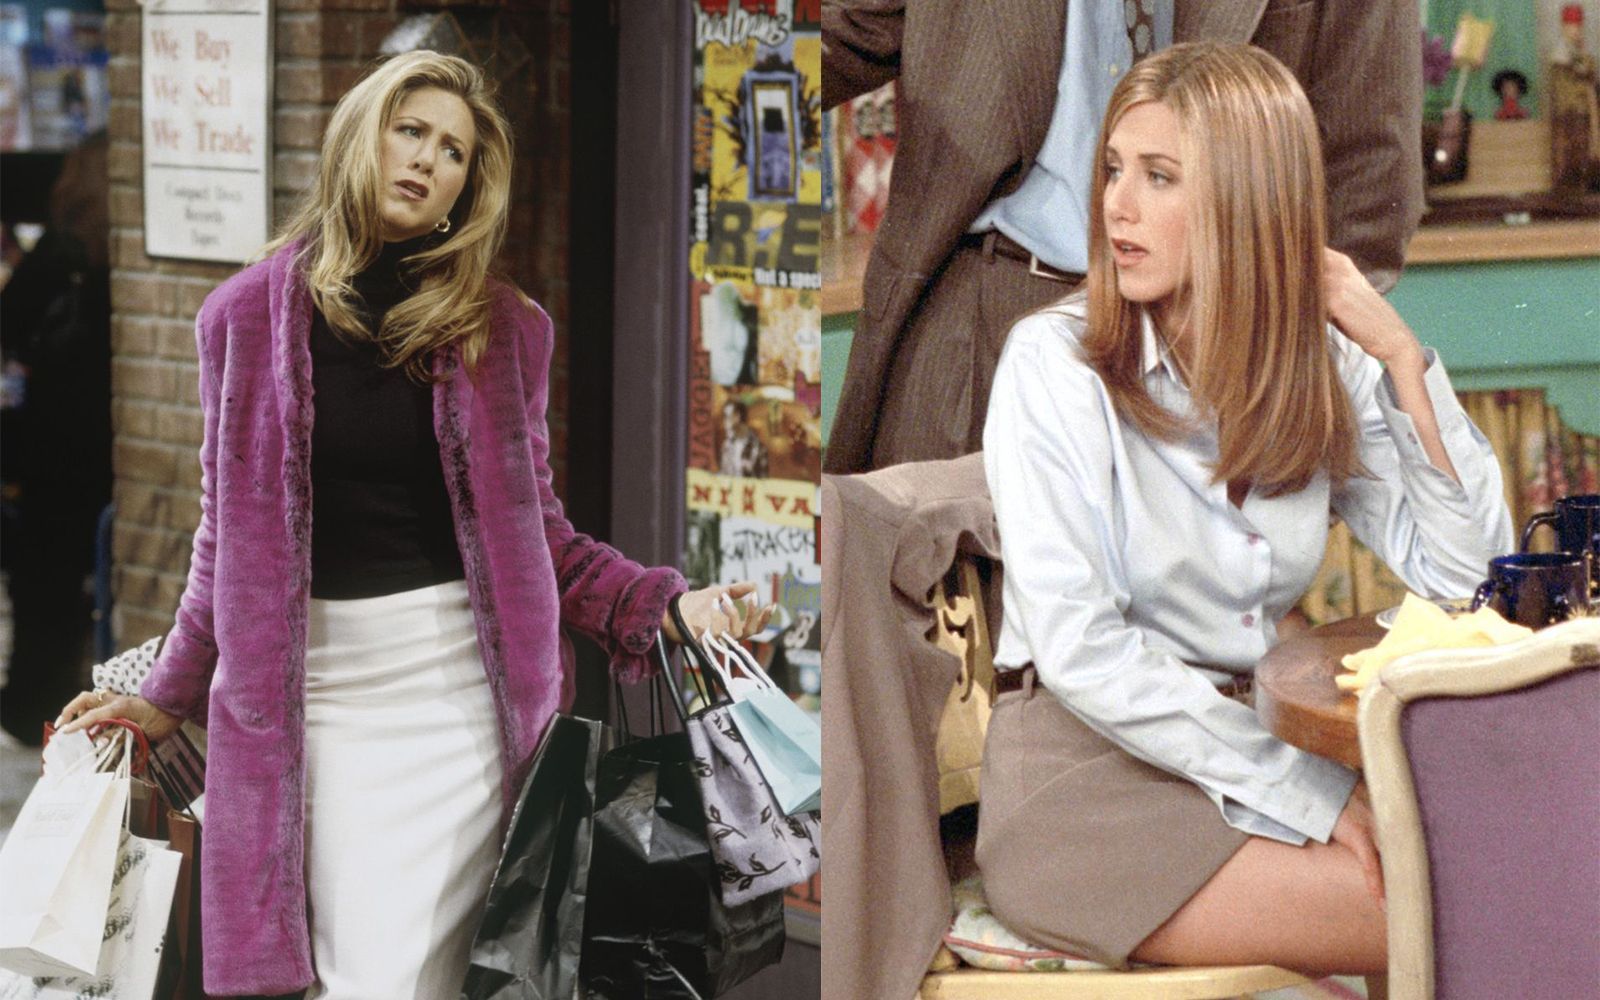 Fall outfits inspired by Rachel Green from the 90s sitcome